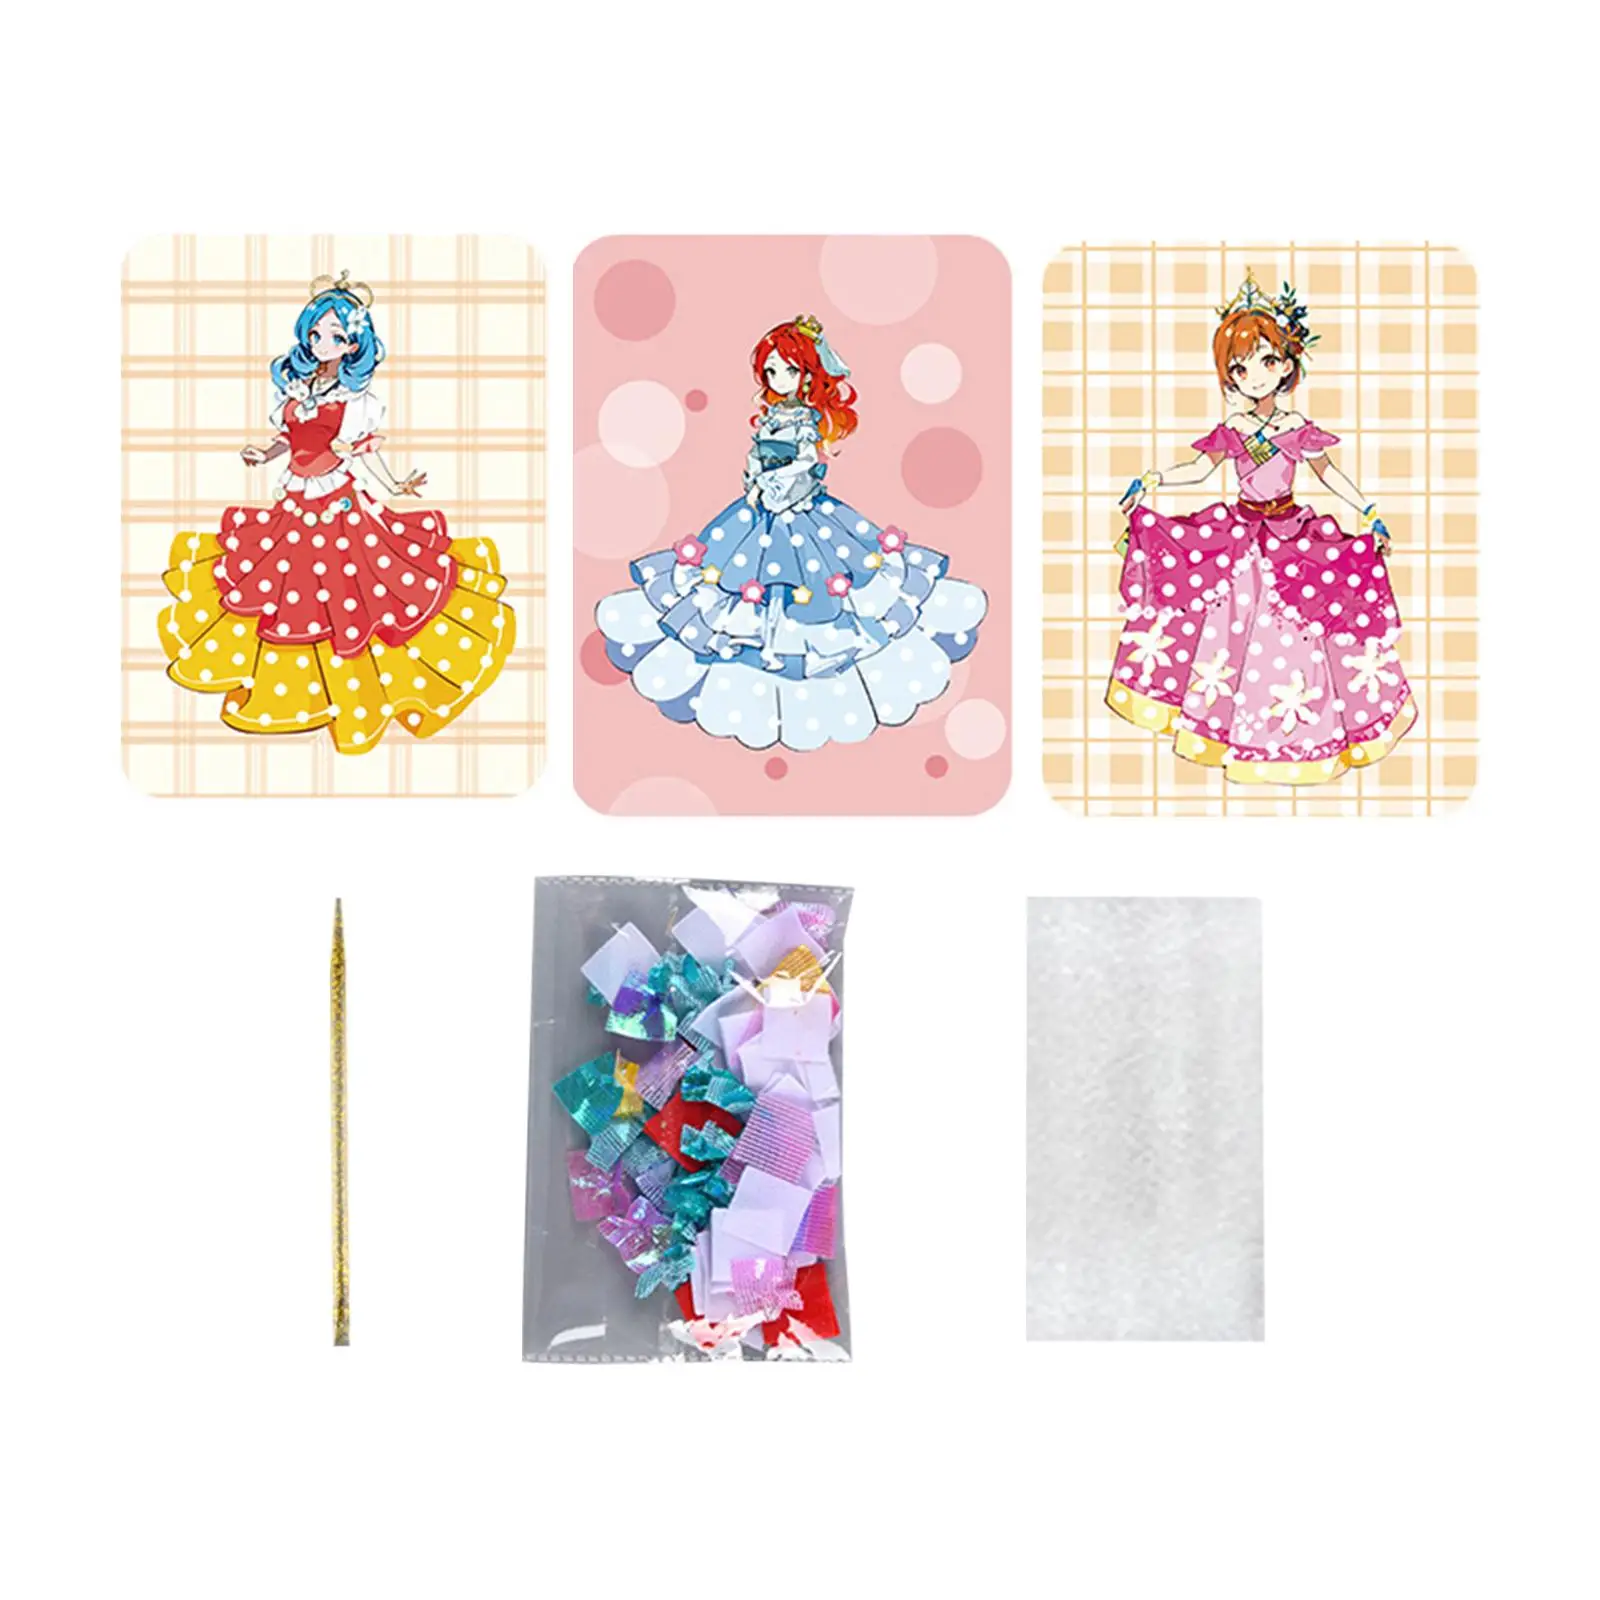 DIY Painting Sticker Craft Toys Poke Art DIY Project Educational Toys Princess Dress up Activity Book for Toddlers Girls Kids